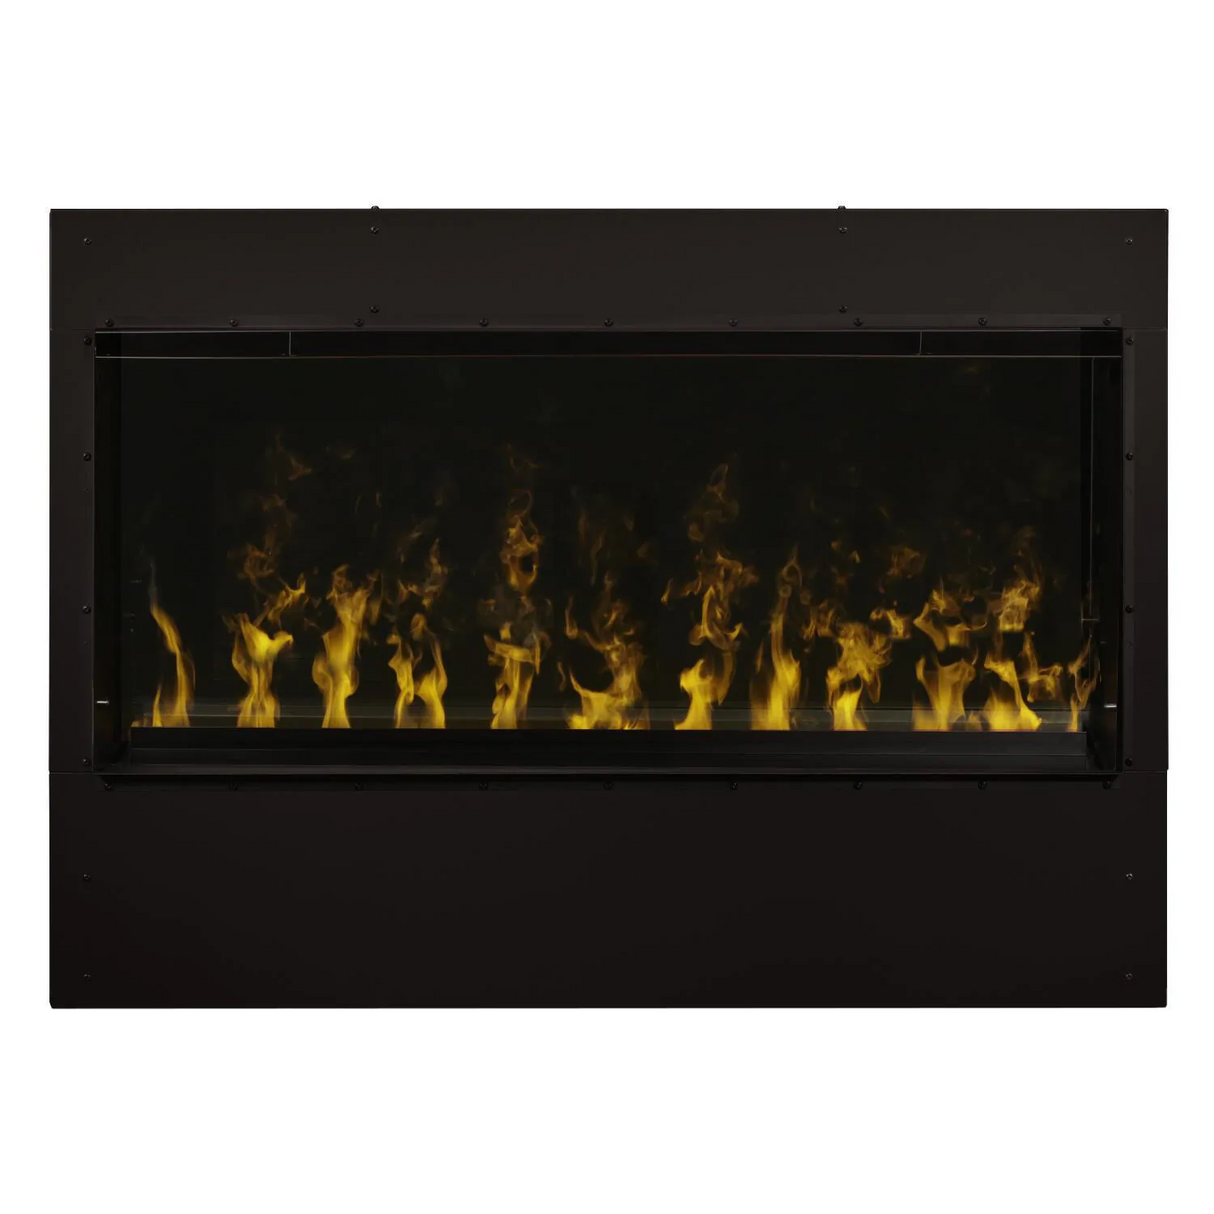 Dimplex - Opti-Myst Pro 1000 46-Inch Built-In Vapor Electric Fireplace - GBF1000-PRO